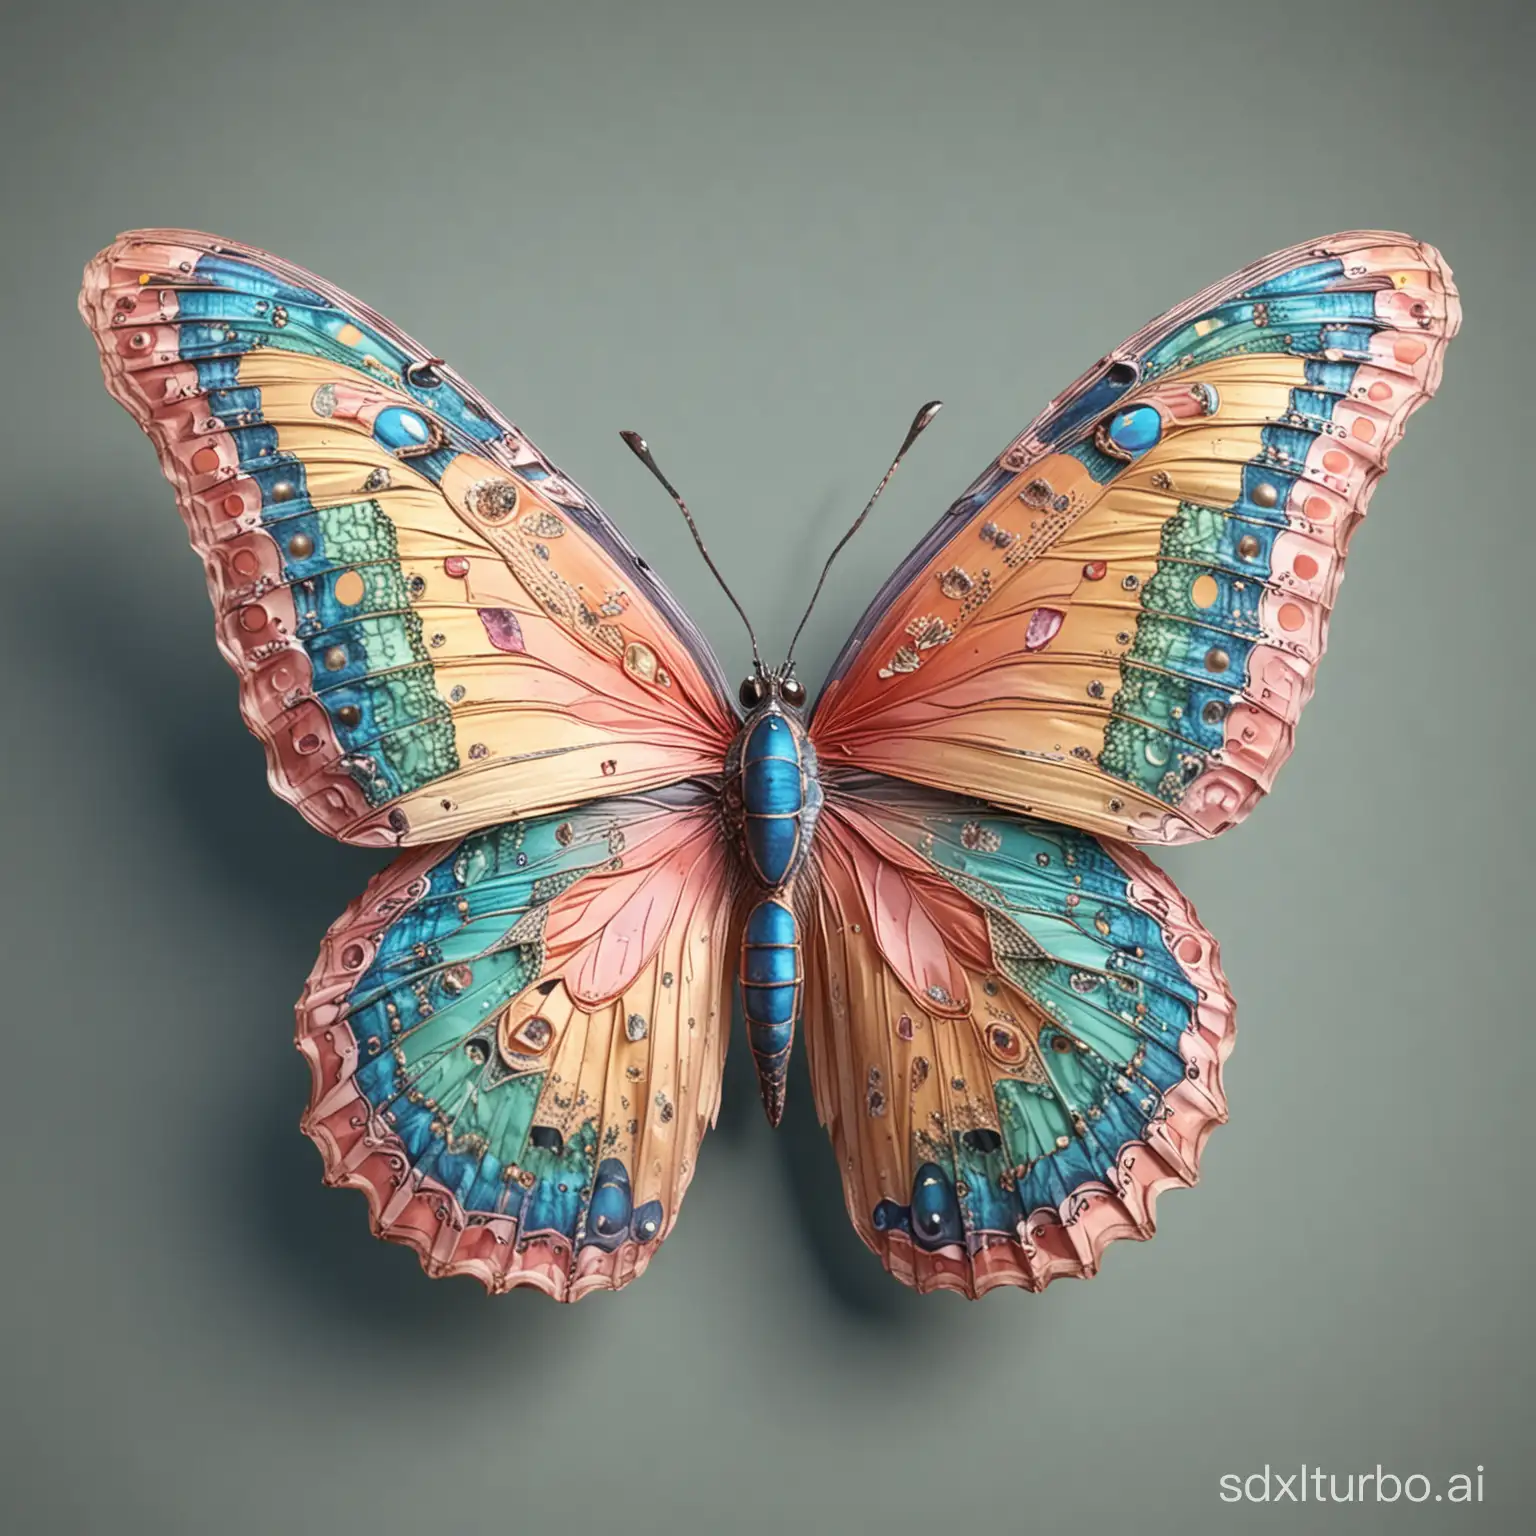 Butterfly three-dimensional view